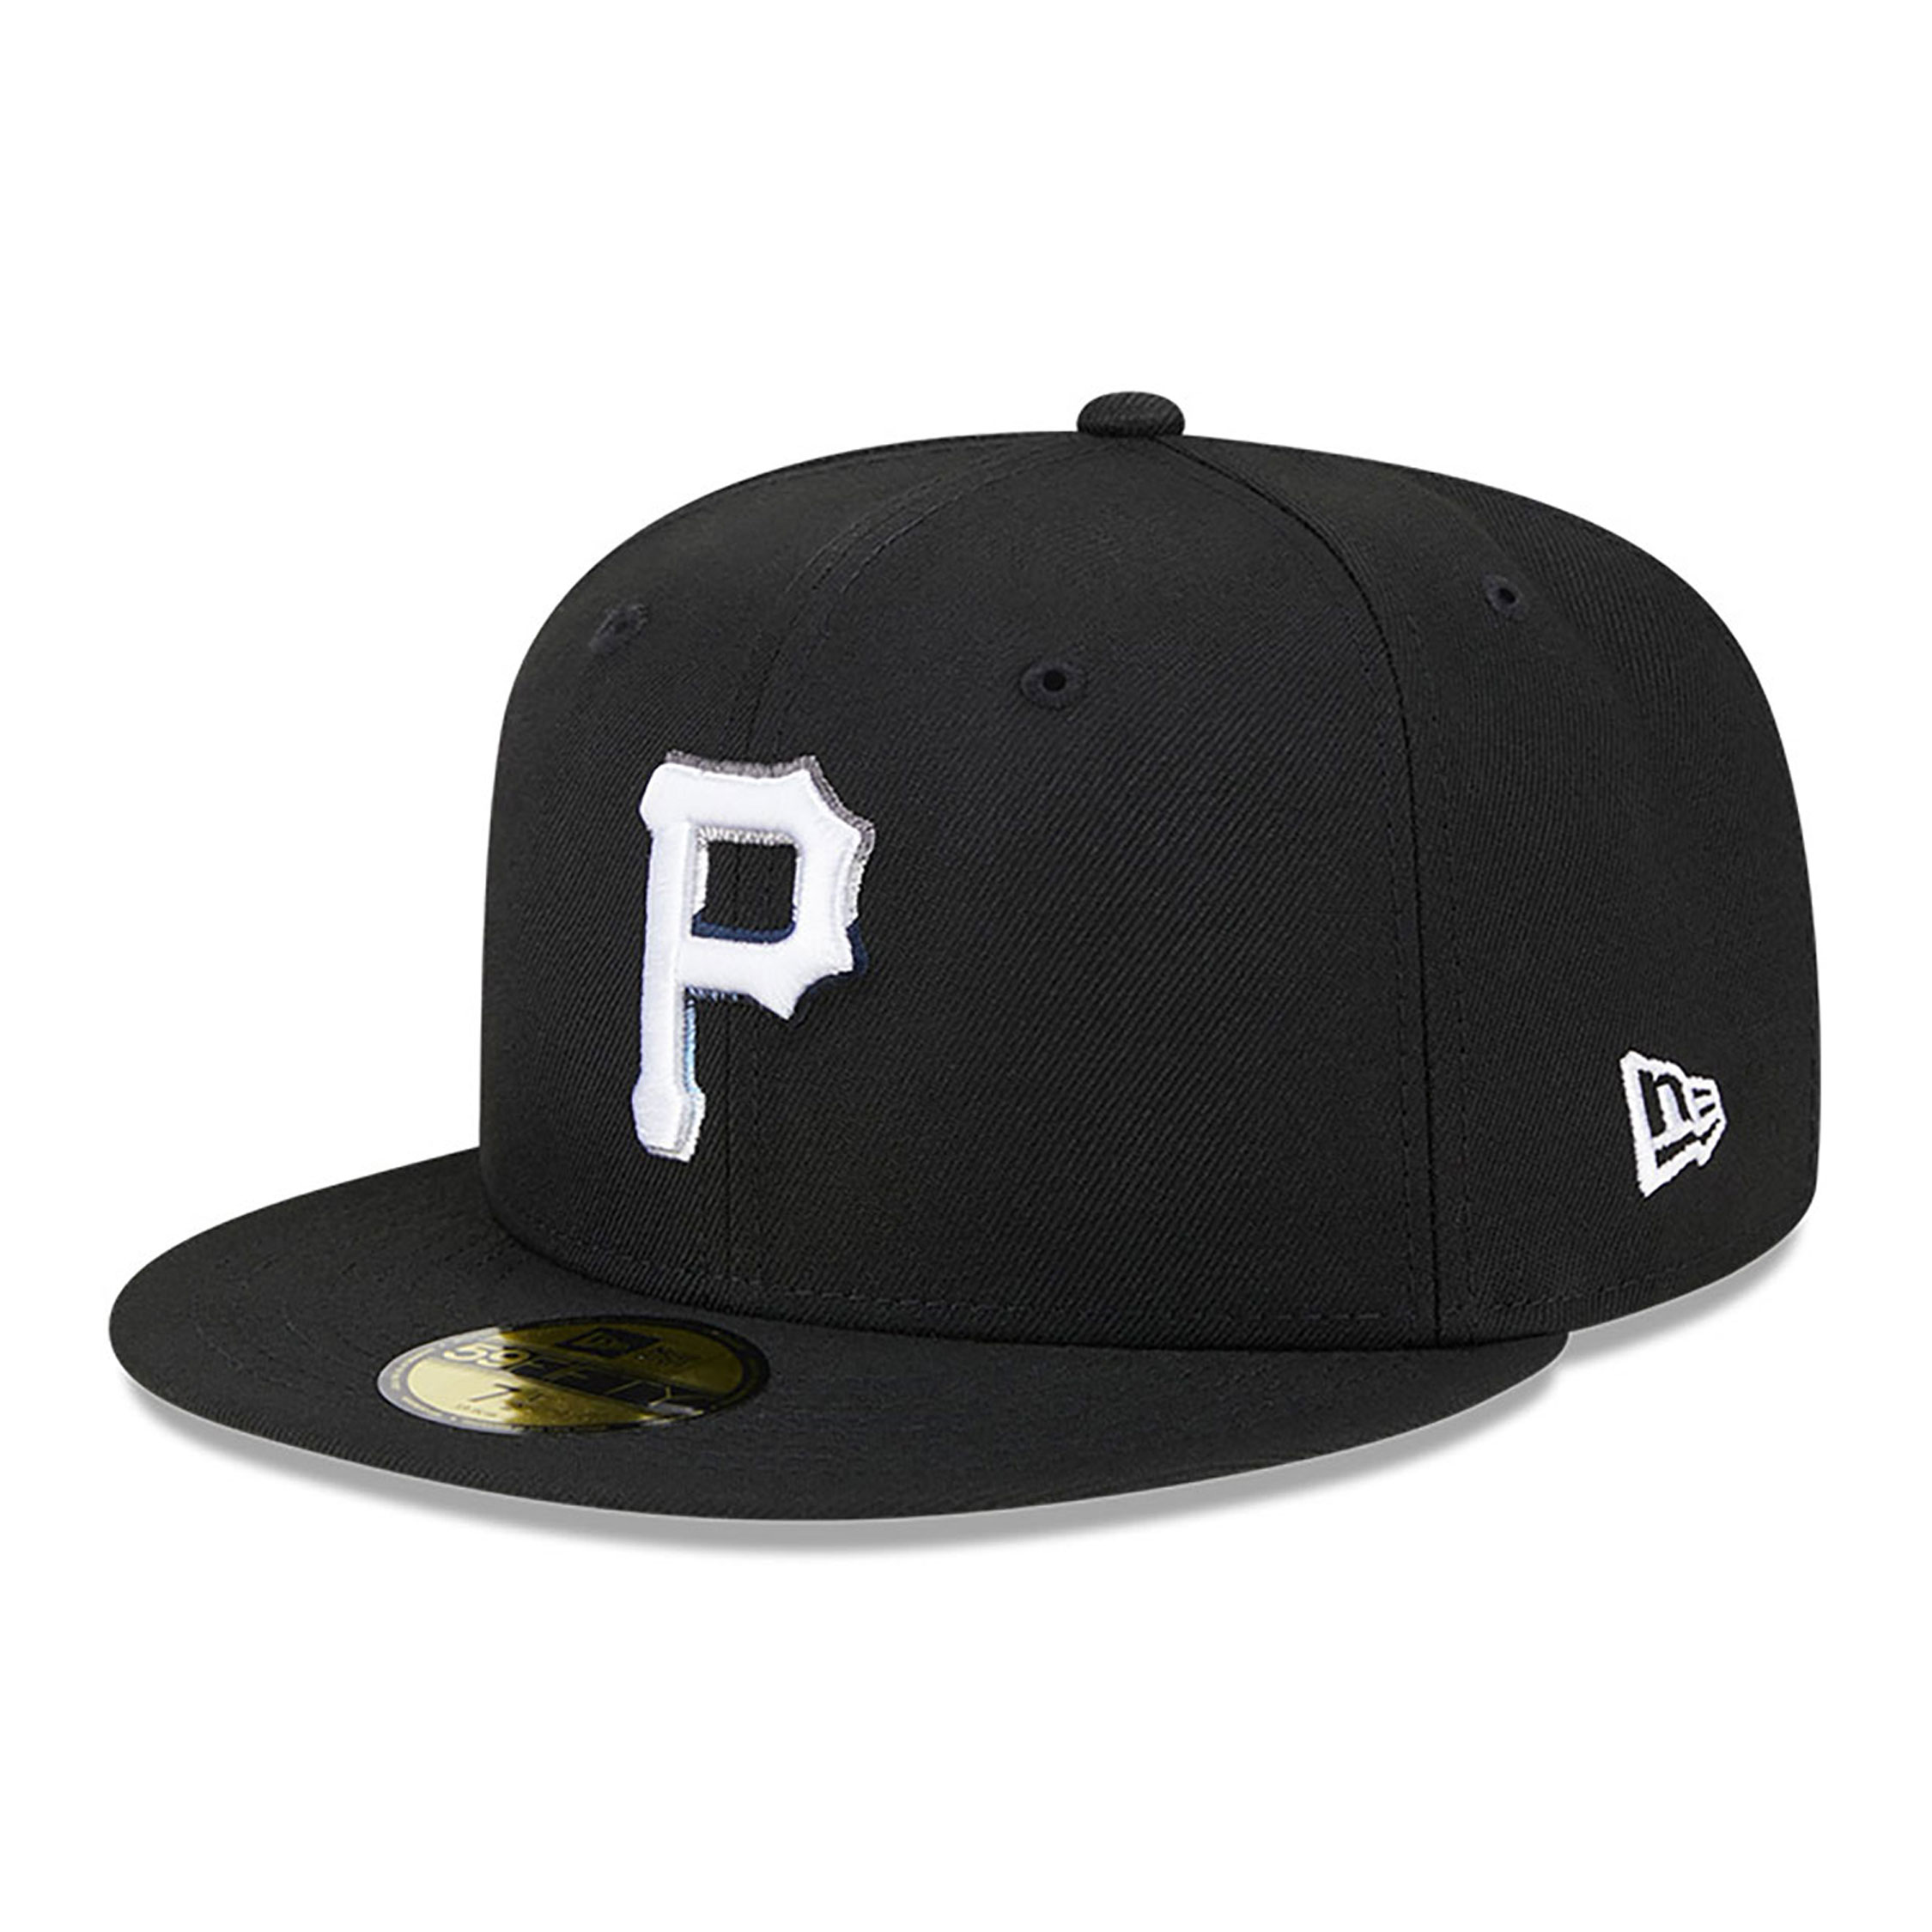 Pittsburgh Pirates Raceway Black 59FIFTY Fitted Cap